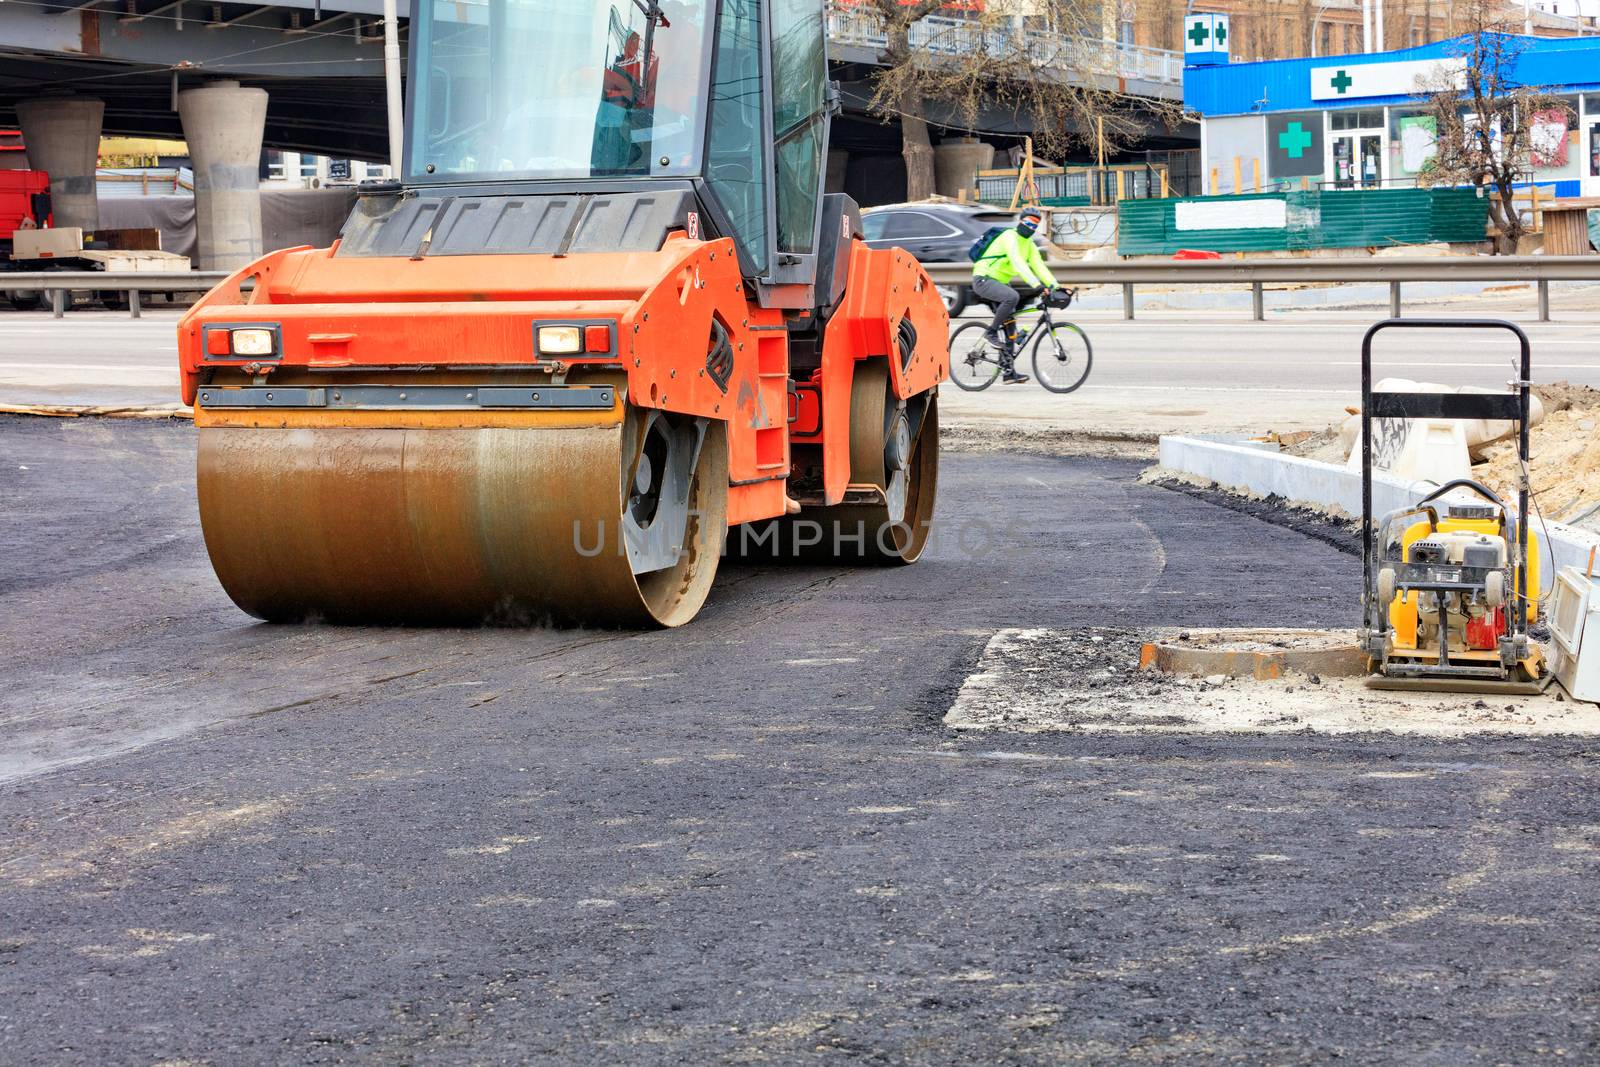 A heavy vibratory roller compacts hot asphalt on the roadway on a clear sunny day. by Sergii